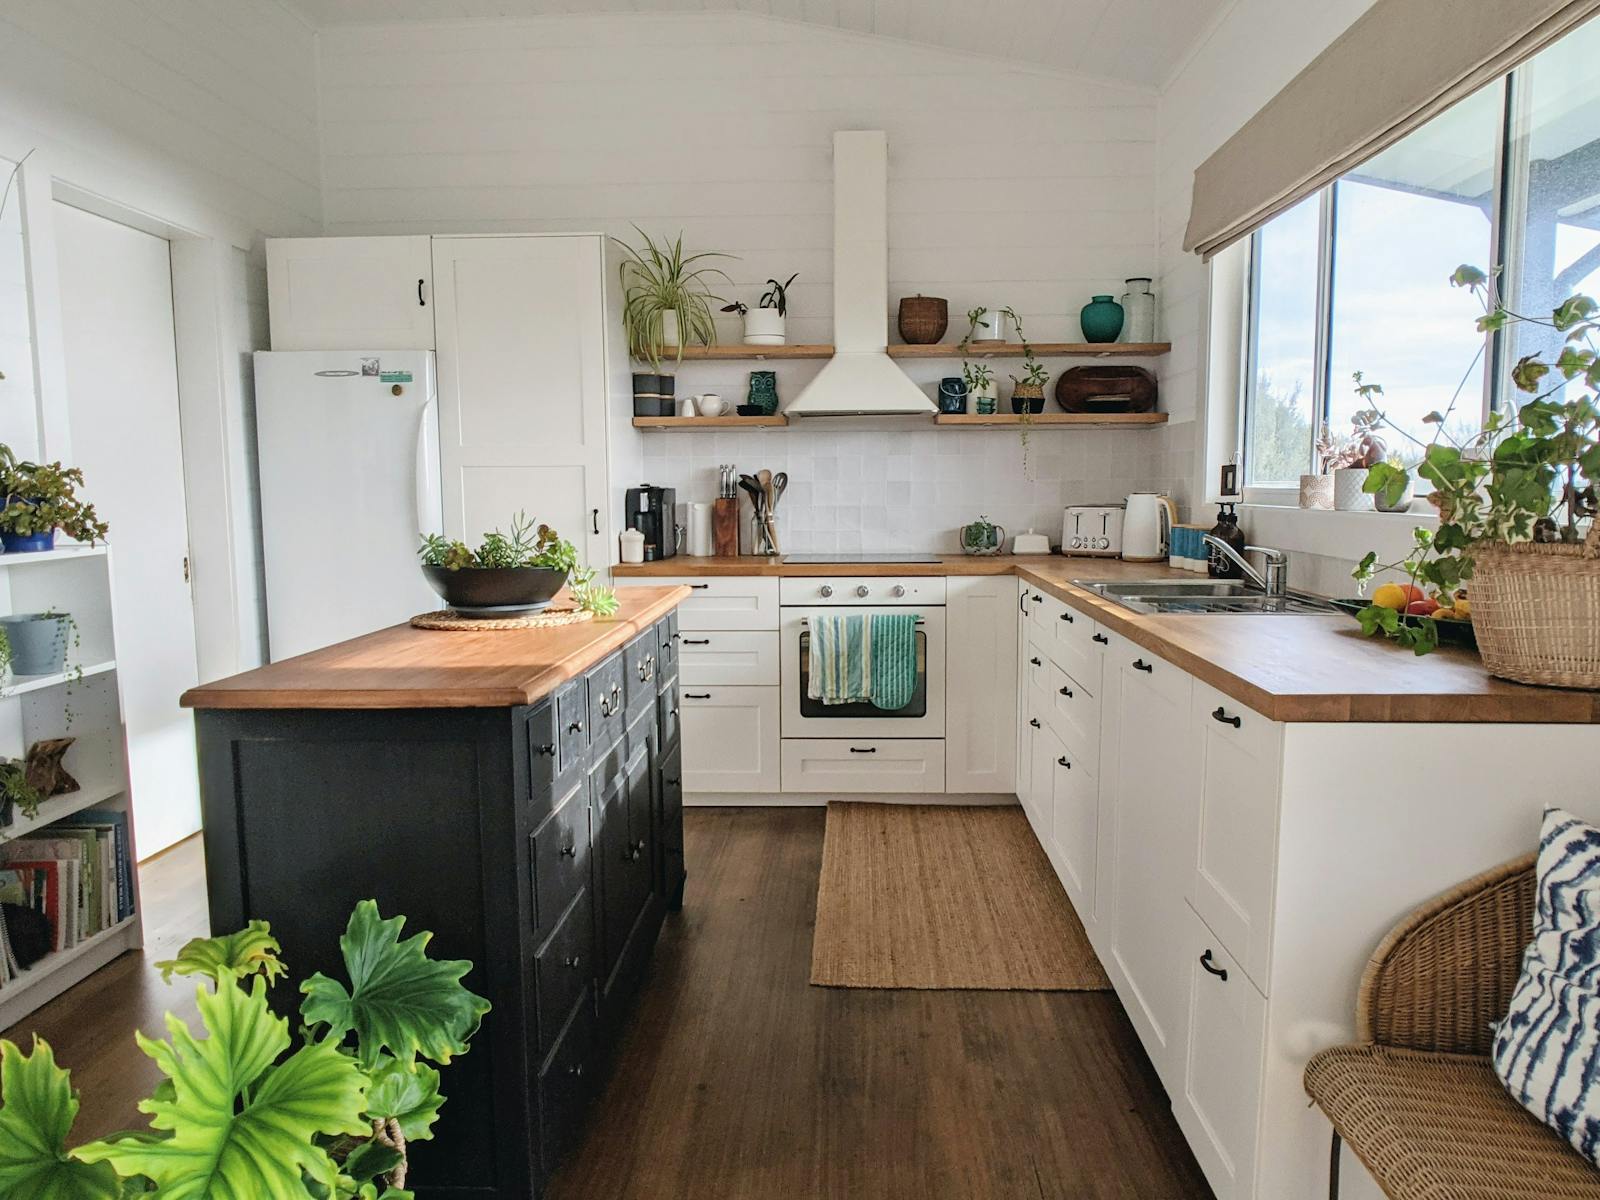 Kitchen with white cabinets and timber benchtop. A black coloured island bench with plant